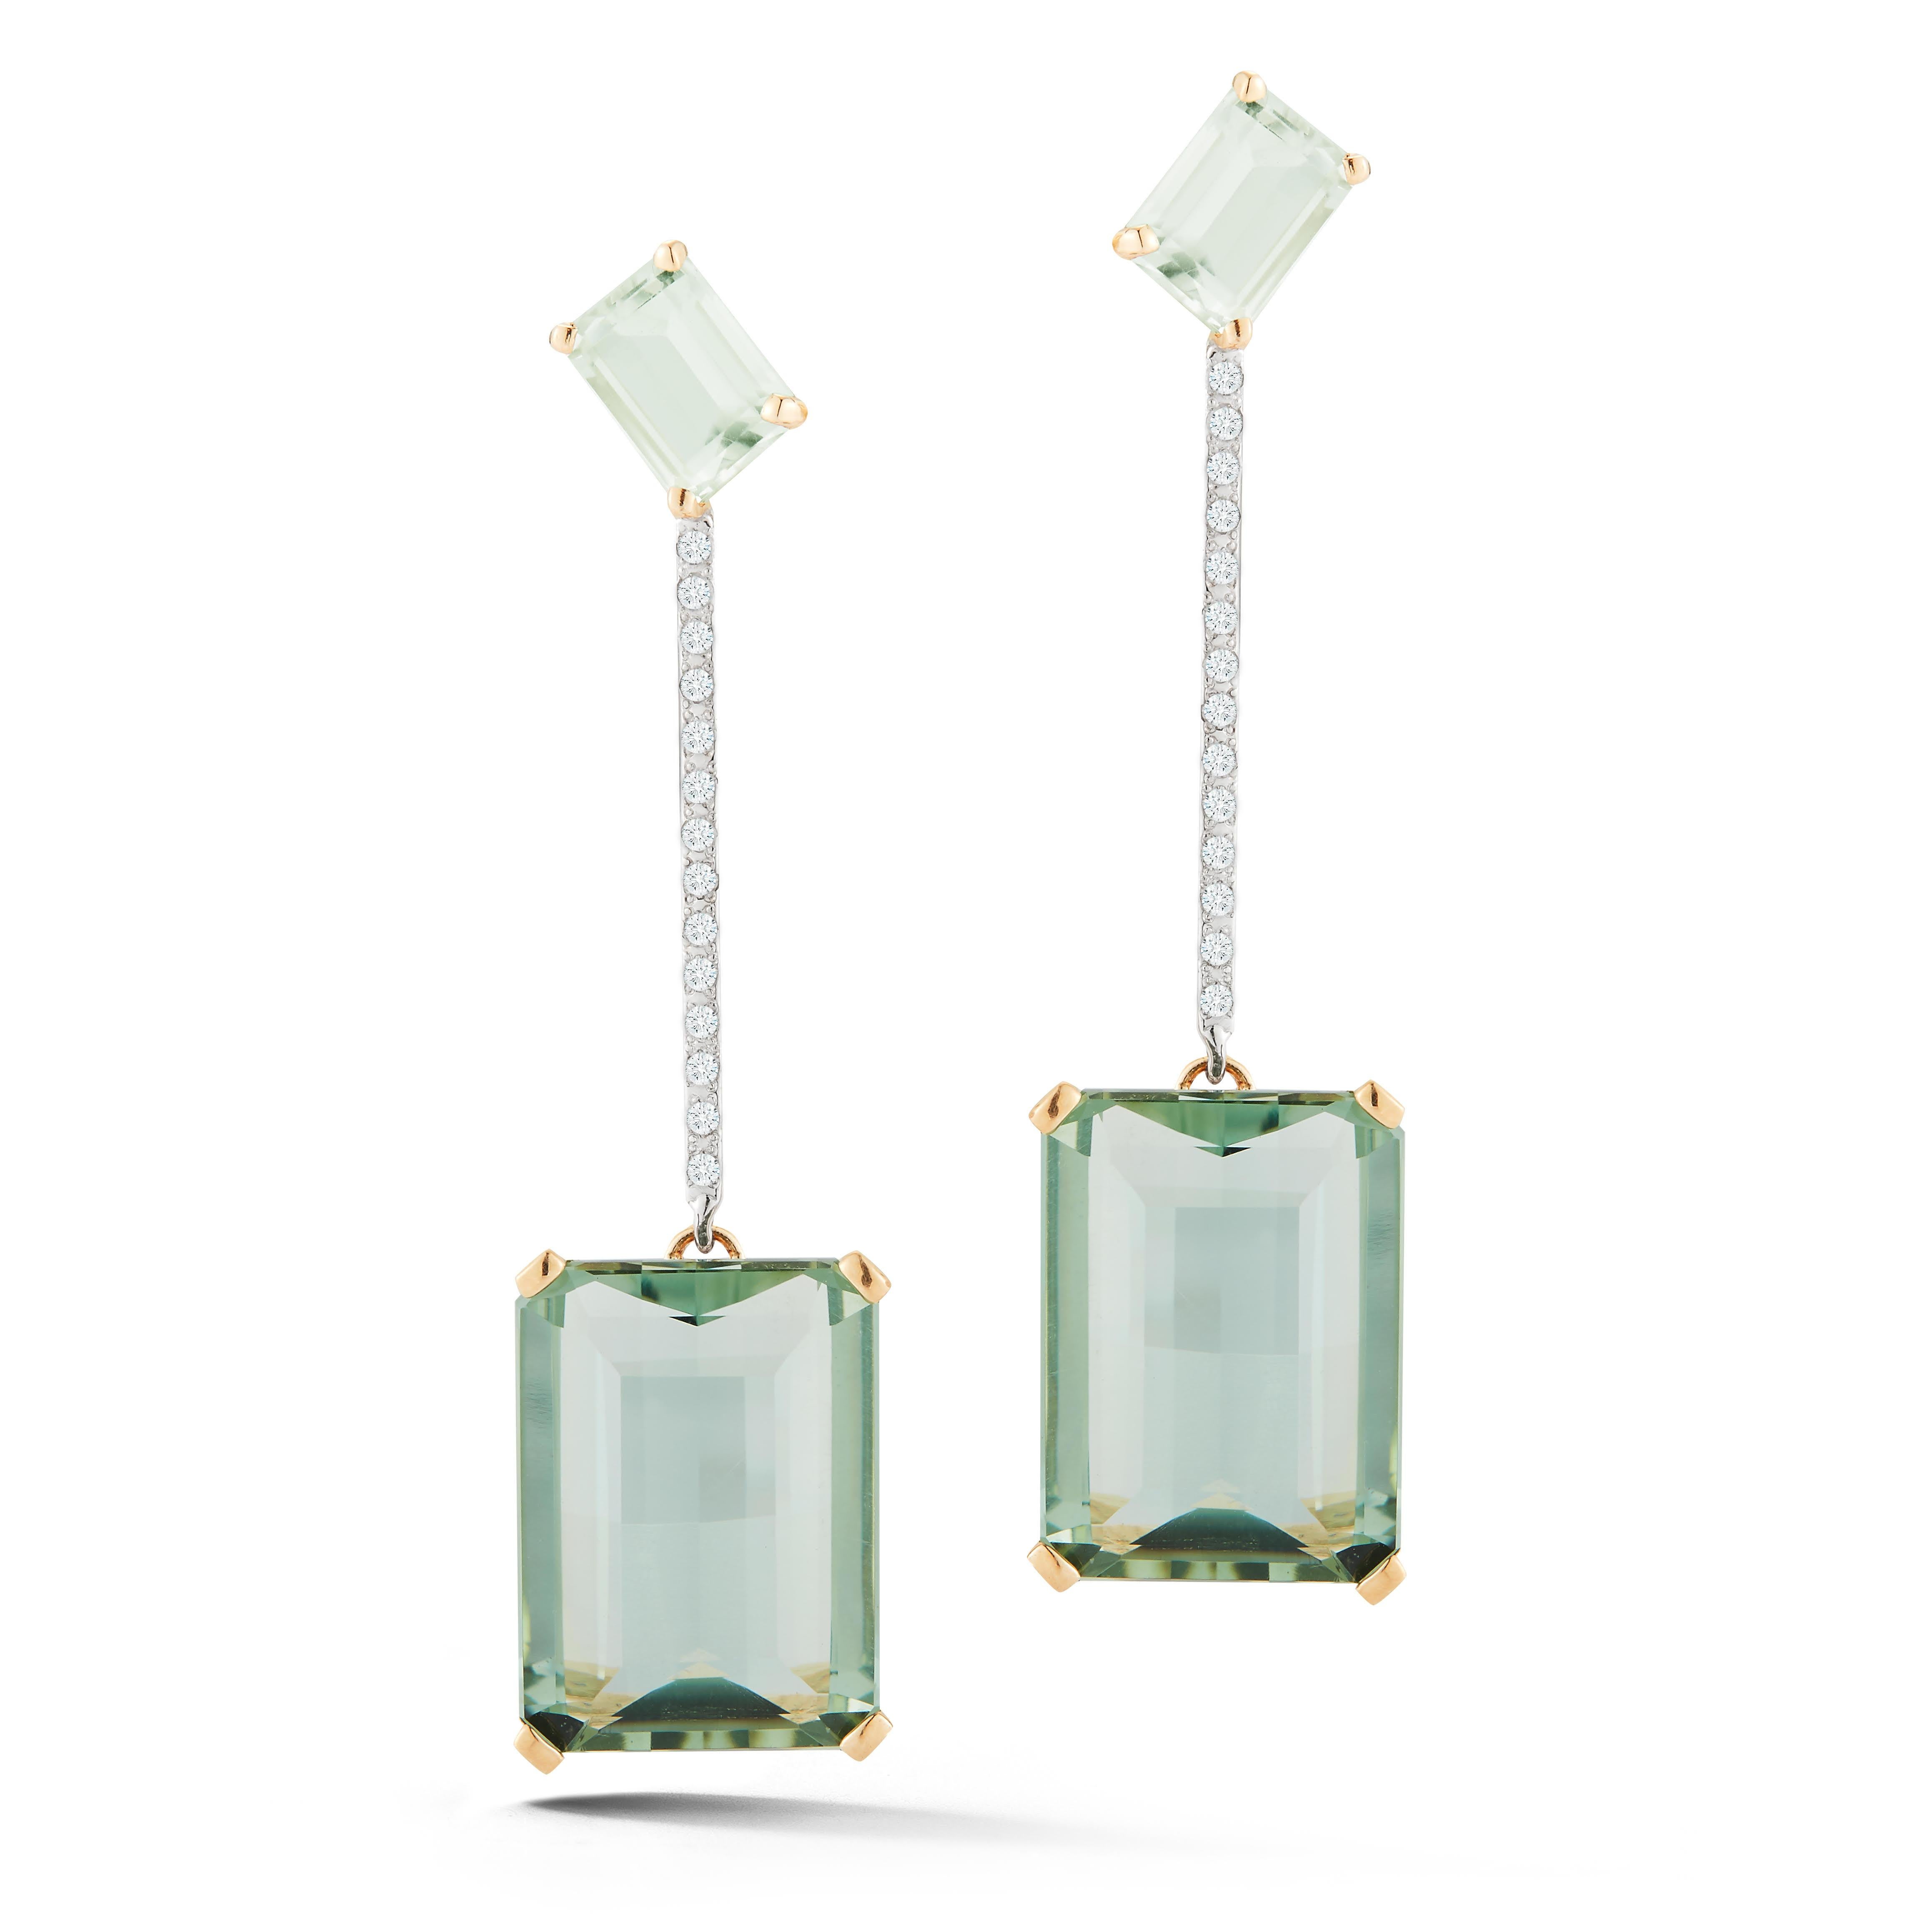 Beautifully handcrafted in New York of solid 14kt yellow gold, emerald cut amethyst of two shades with brilliant diamonds.  These strikingly beautiful earrings are the perfect way to add color to ones look and stand out.